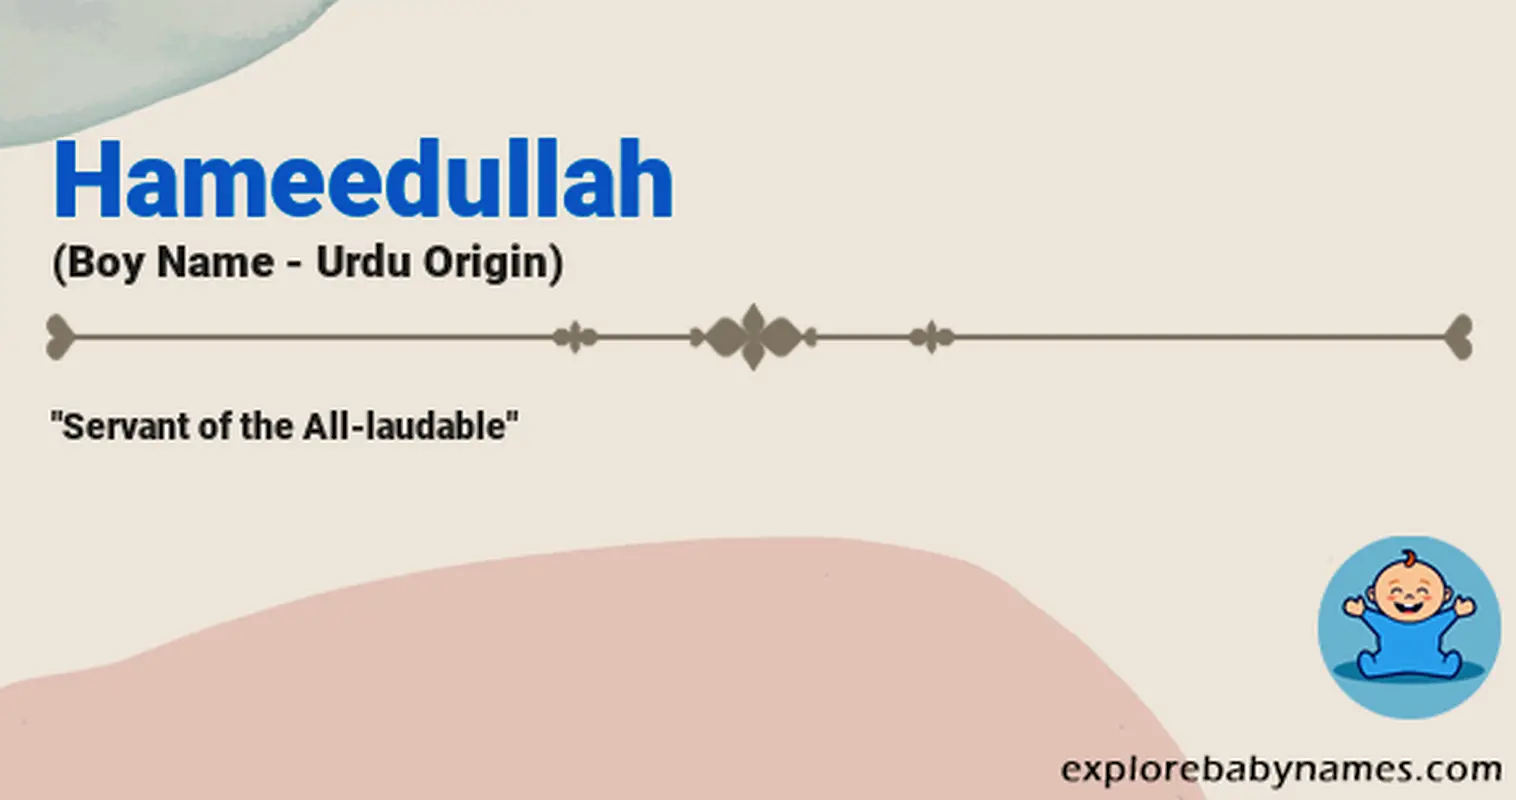 Meaning of Hameedullah